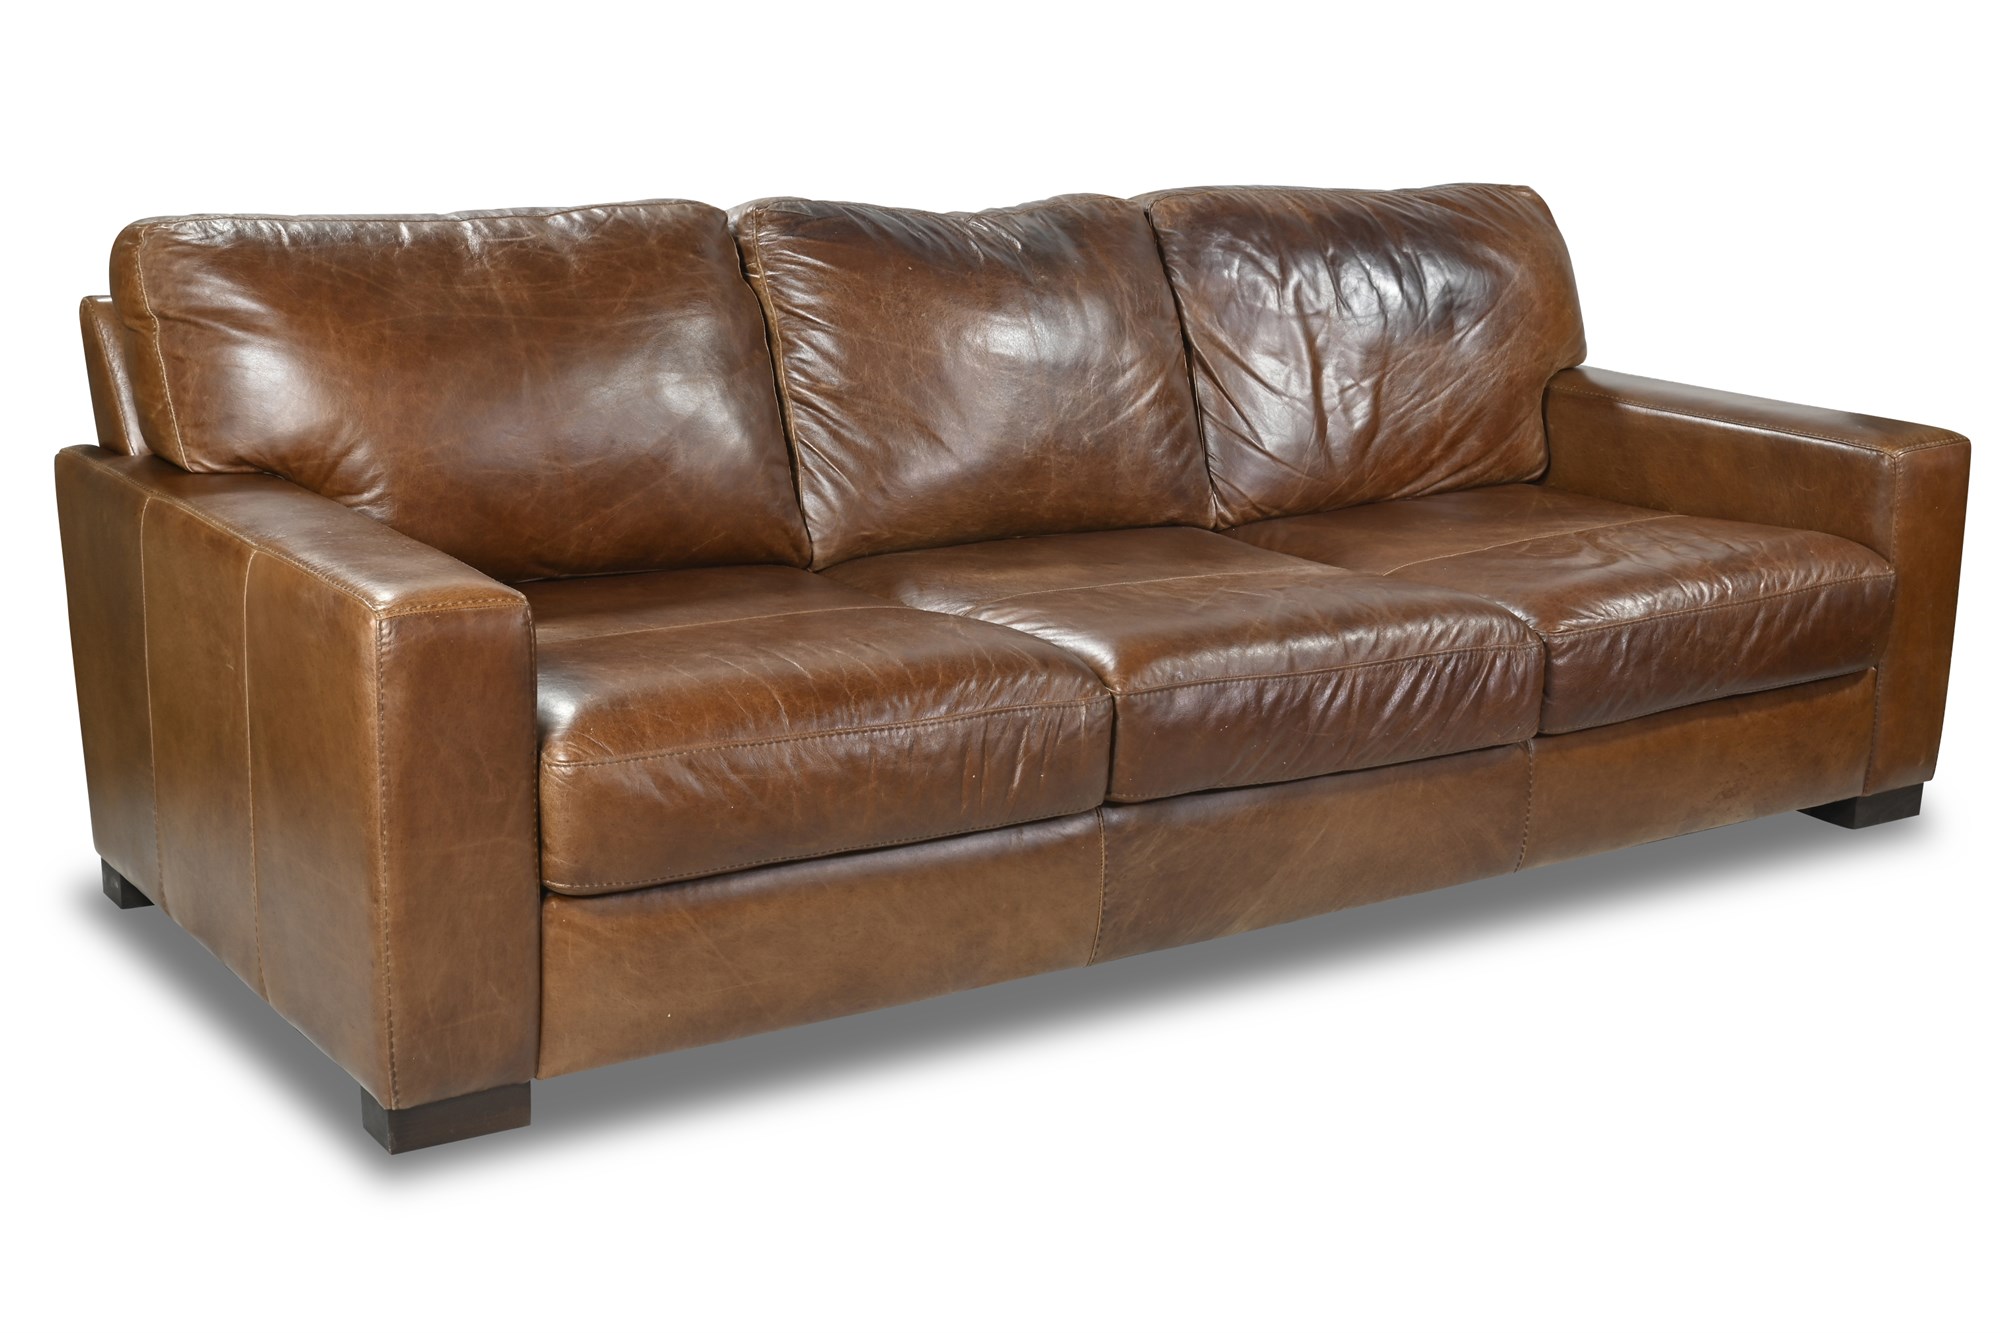 softline leather sofa review